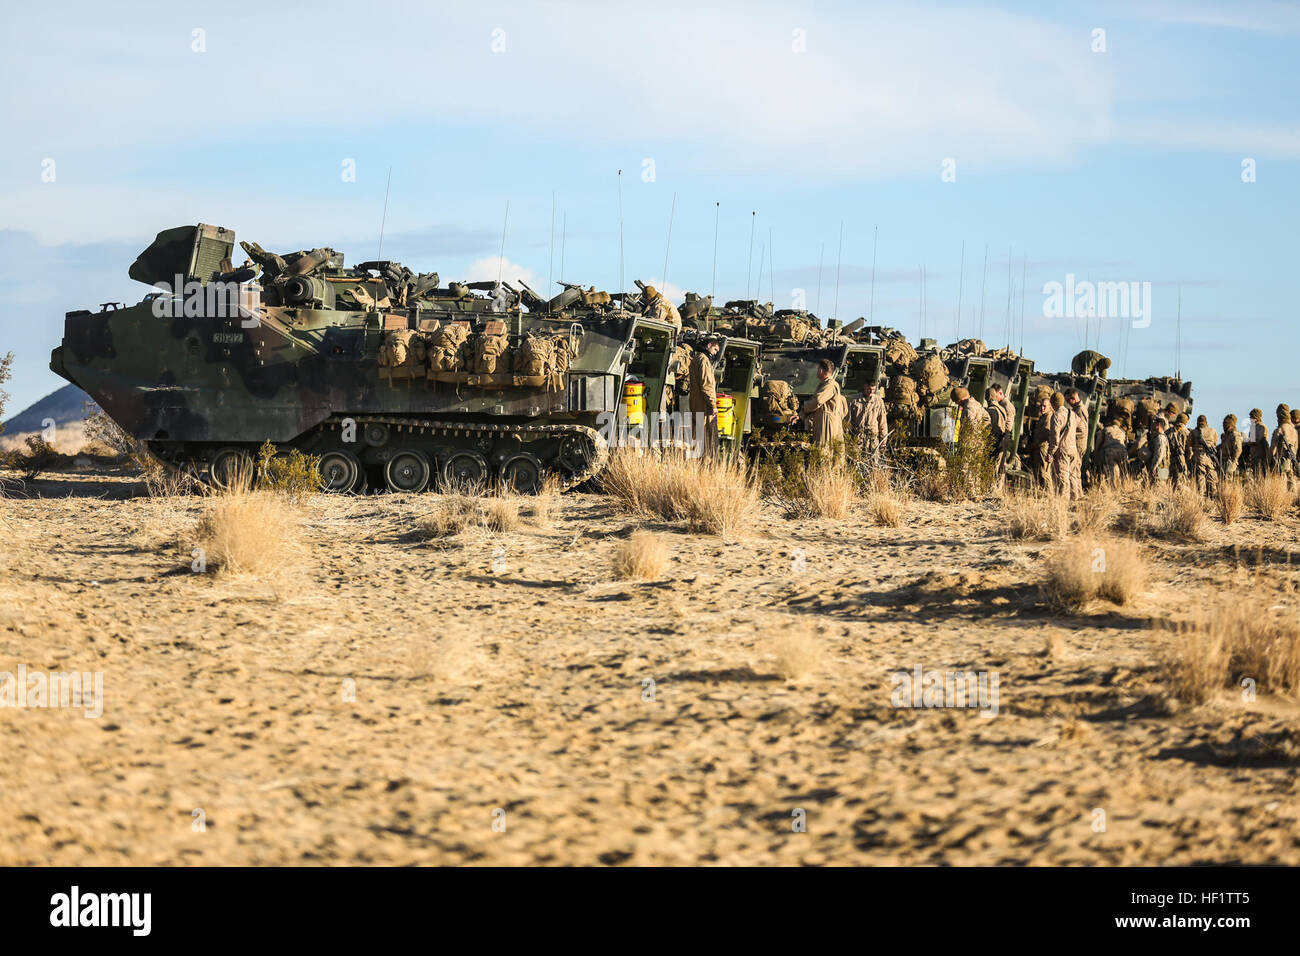 U.S. Marines with Alpha Company, 1st Battalion, 5th Marines, load six Amphibious Assault Vehicles (AAV-7A1) before departing to conduct live fire operations during Exercise STEEL KNIGHT 2014 aboard Marine Corps Air Ground Combat Center Twentynine Palms, Calif., Dec. 12, 2013. Steel Knight enables 1st Marine Division to test and refine its command and control capabilities by acting as the headquarters element for a forward-deployed Marine Expeditionary force. (U.S. Marine Corps photo by Cpl. Justin A. Bopp, 1st Marine Division Combat Camera / Released) STEEL KNIGHT 2014 131212-M-ET040-092 Stock Photo